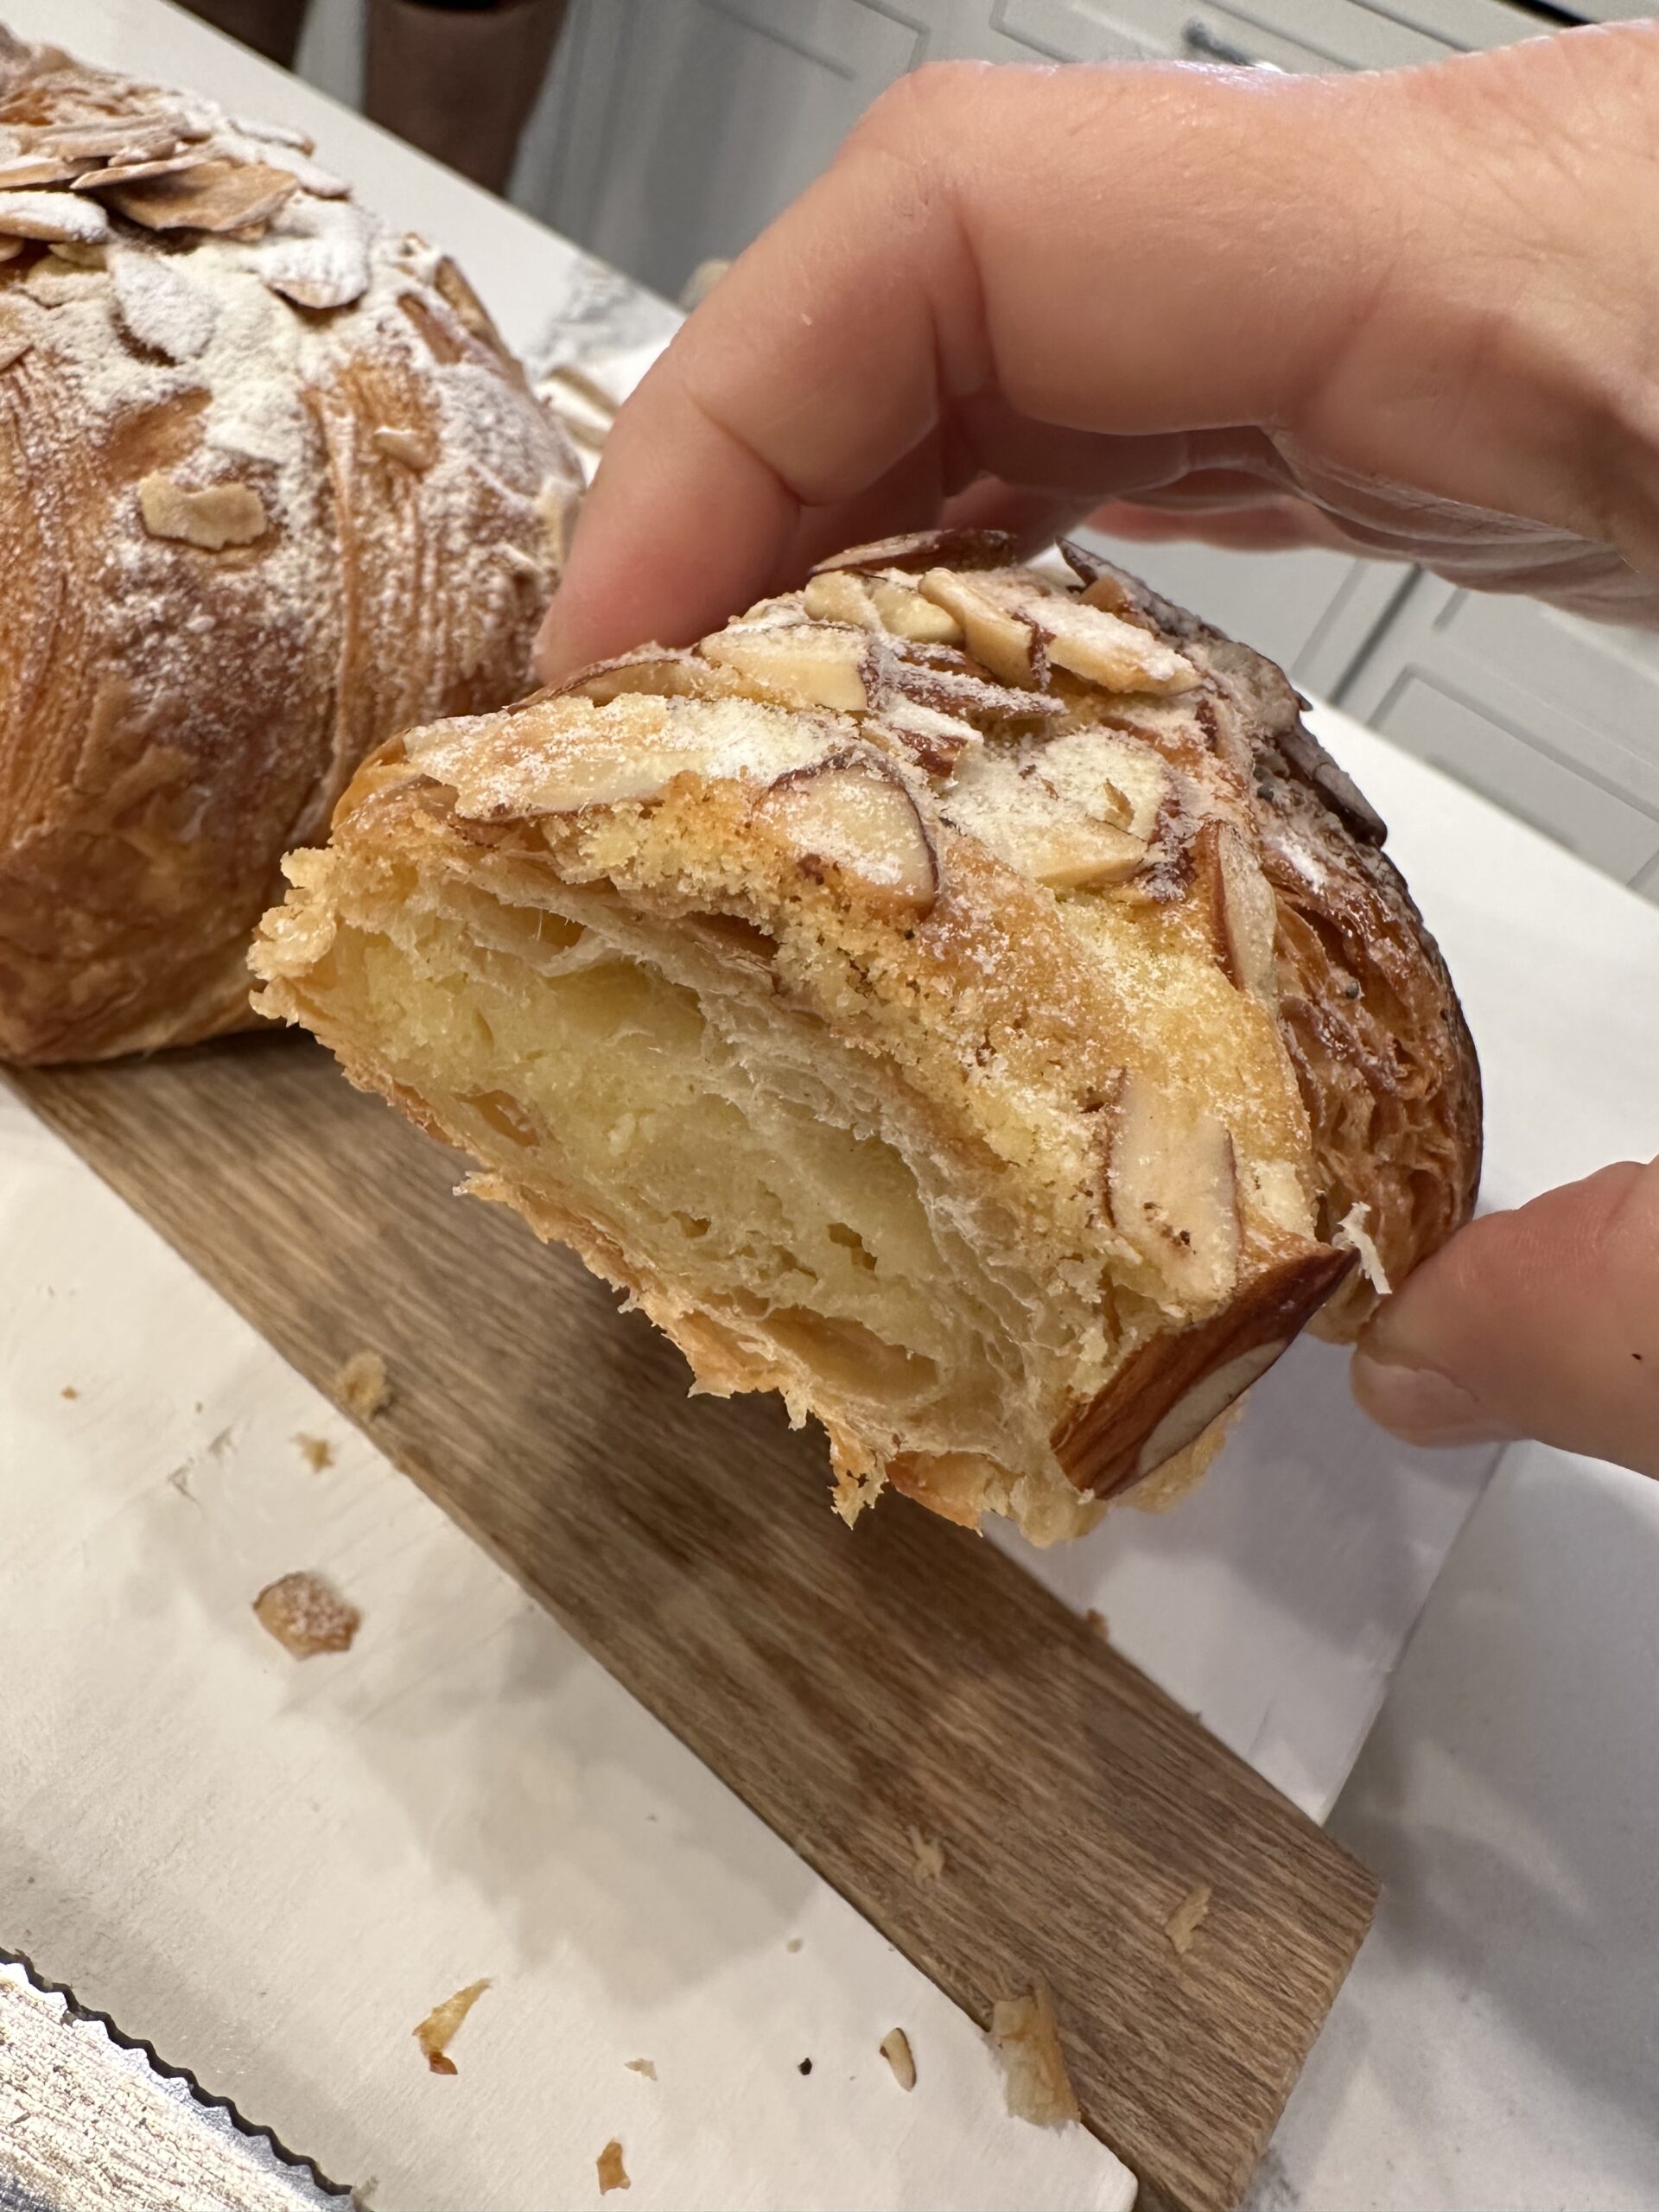 Interior of the Almond Croissant from Paul French Bakery & Cafe 